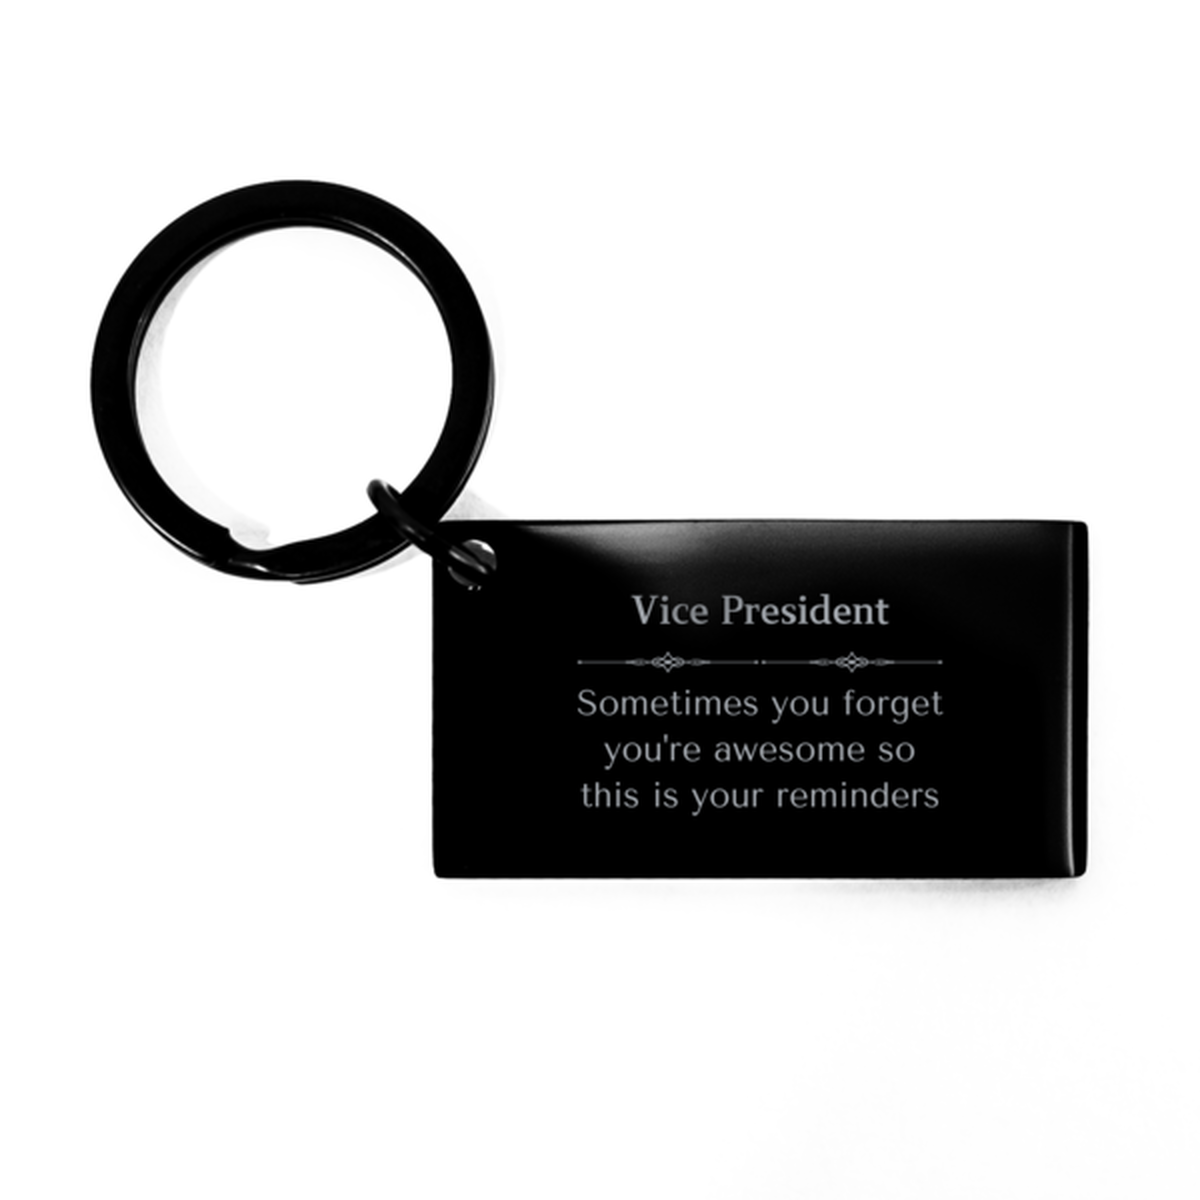 Sentimental Vice President Keychain, Ambulance Driver Sometimes you forget you're awesome so this is your reminders, Graduation Christmas Birthday Gifts for Vice President, Men, Women, Coworkers